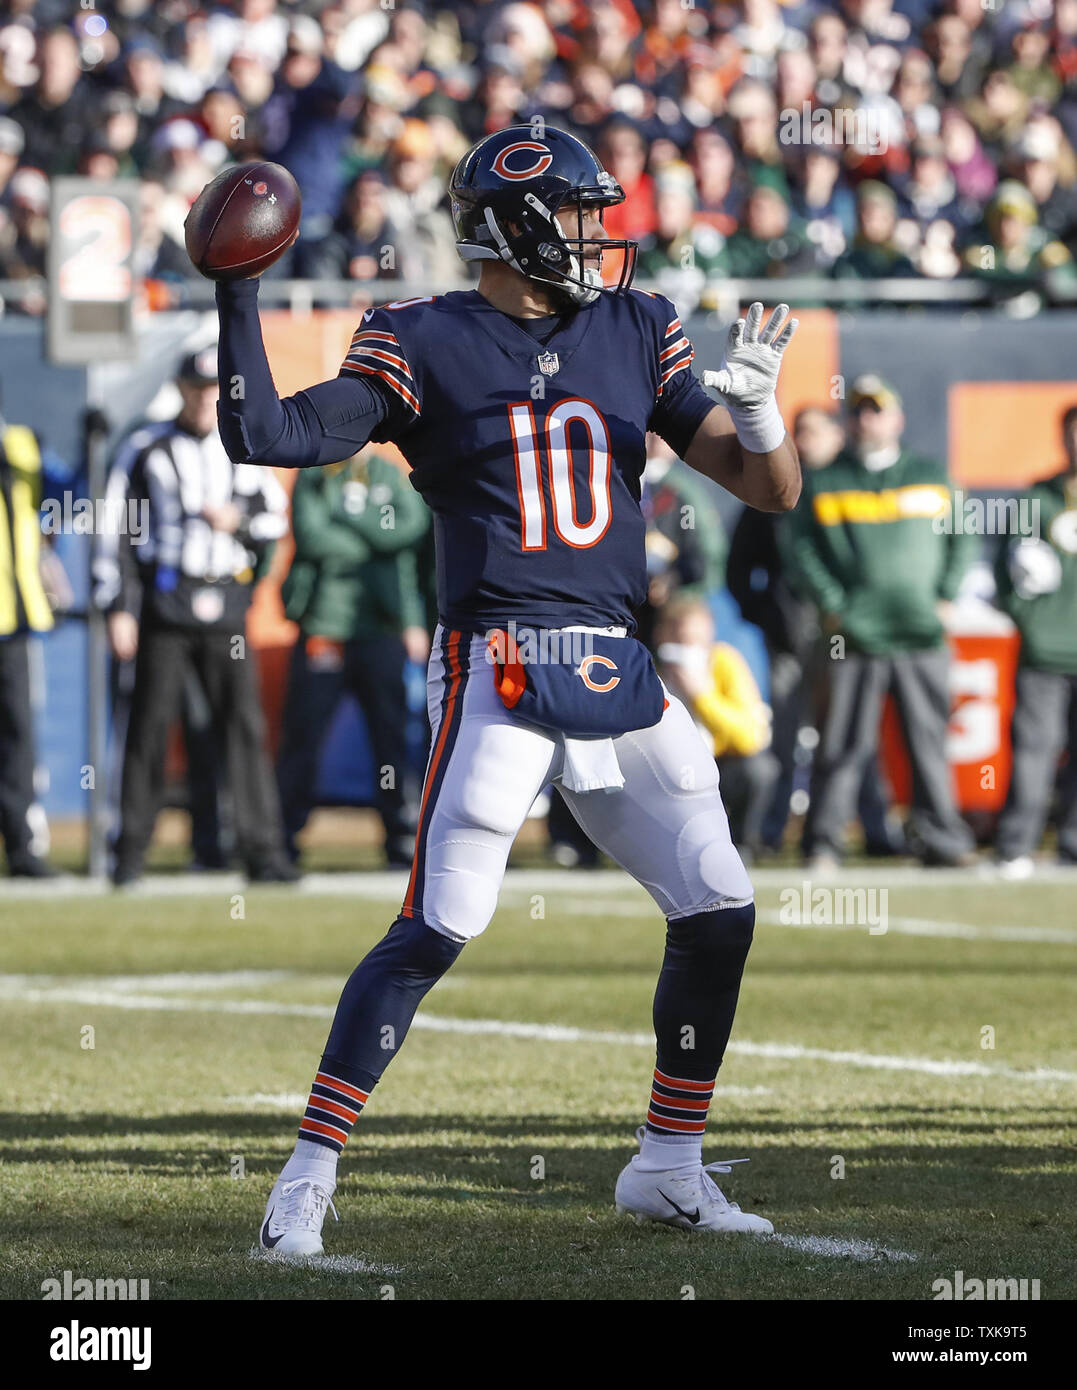 Chicago Bears quarterback Mitchell Trubisky (10) looks to pass the ball against the Green Bay Packers during the second half at Soldier Field in Chicago on December 16, 2018. Photo by Kamil Krzaczynski/UPI Stock Photo